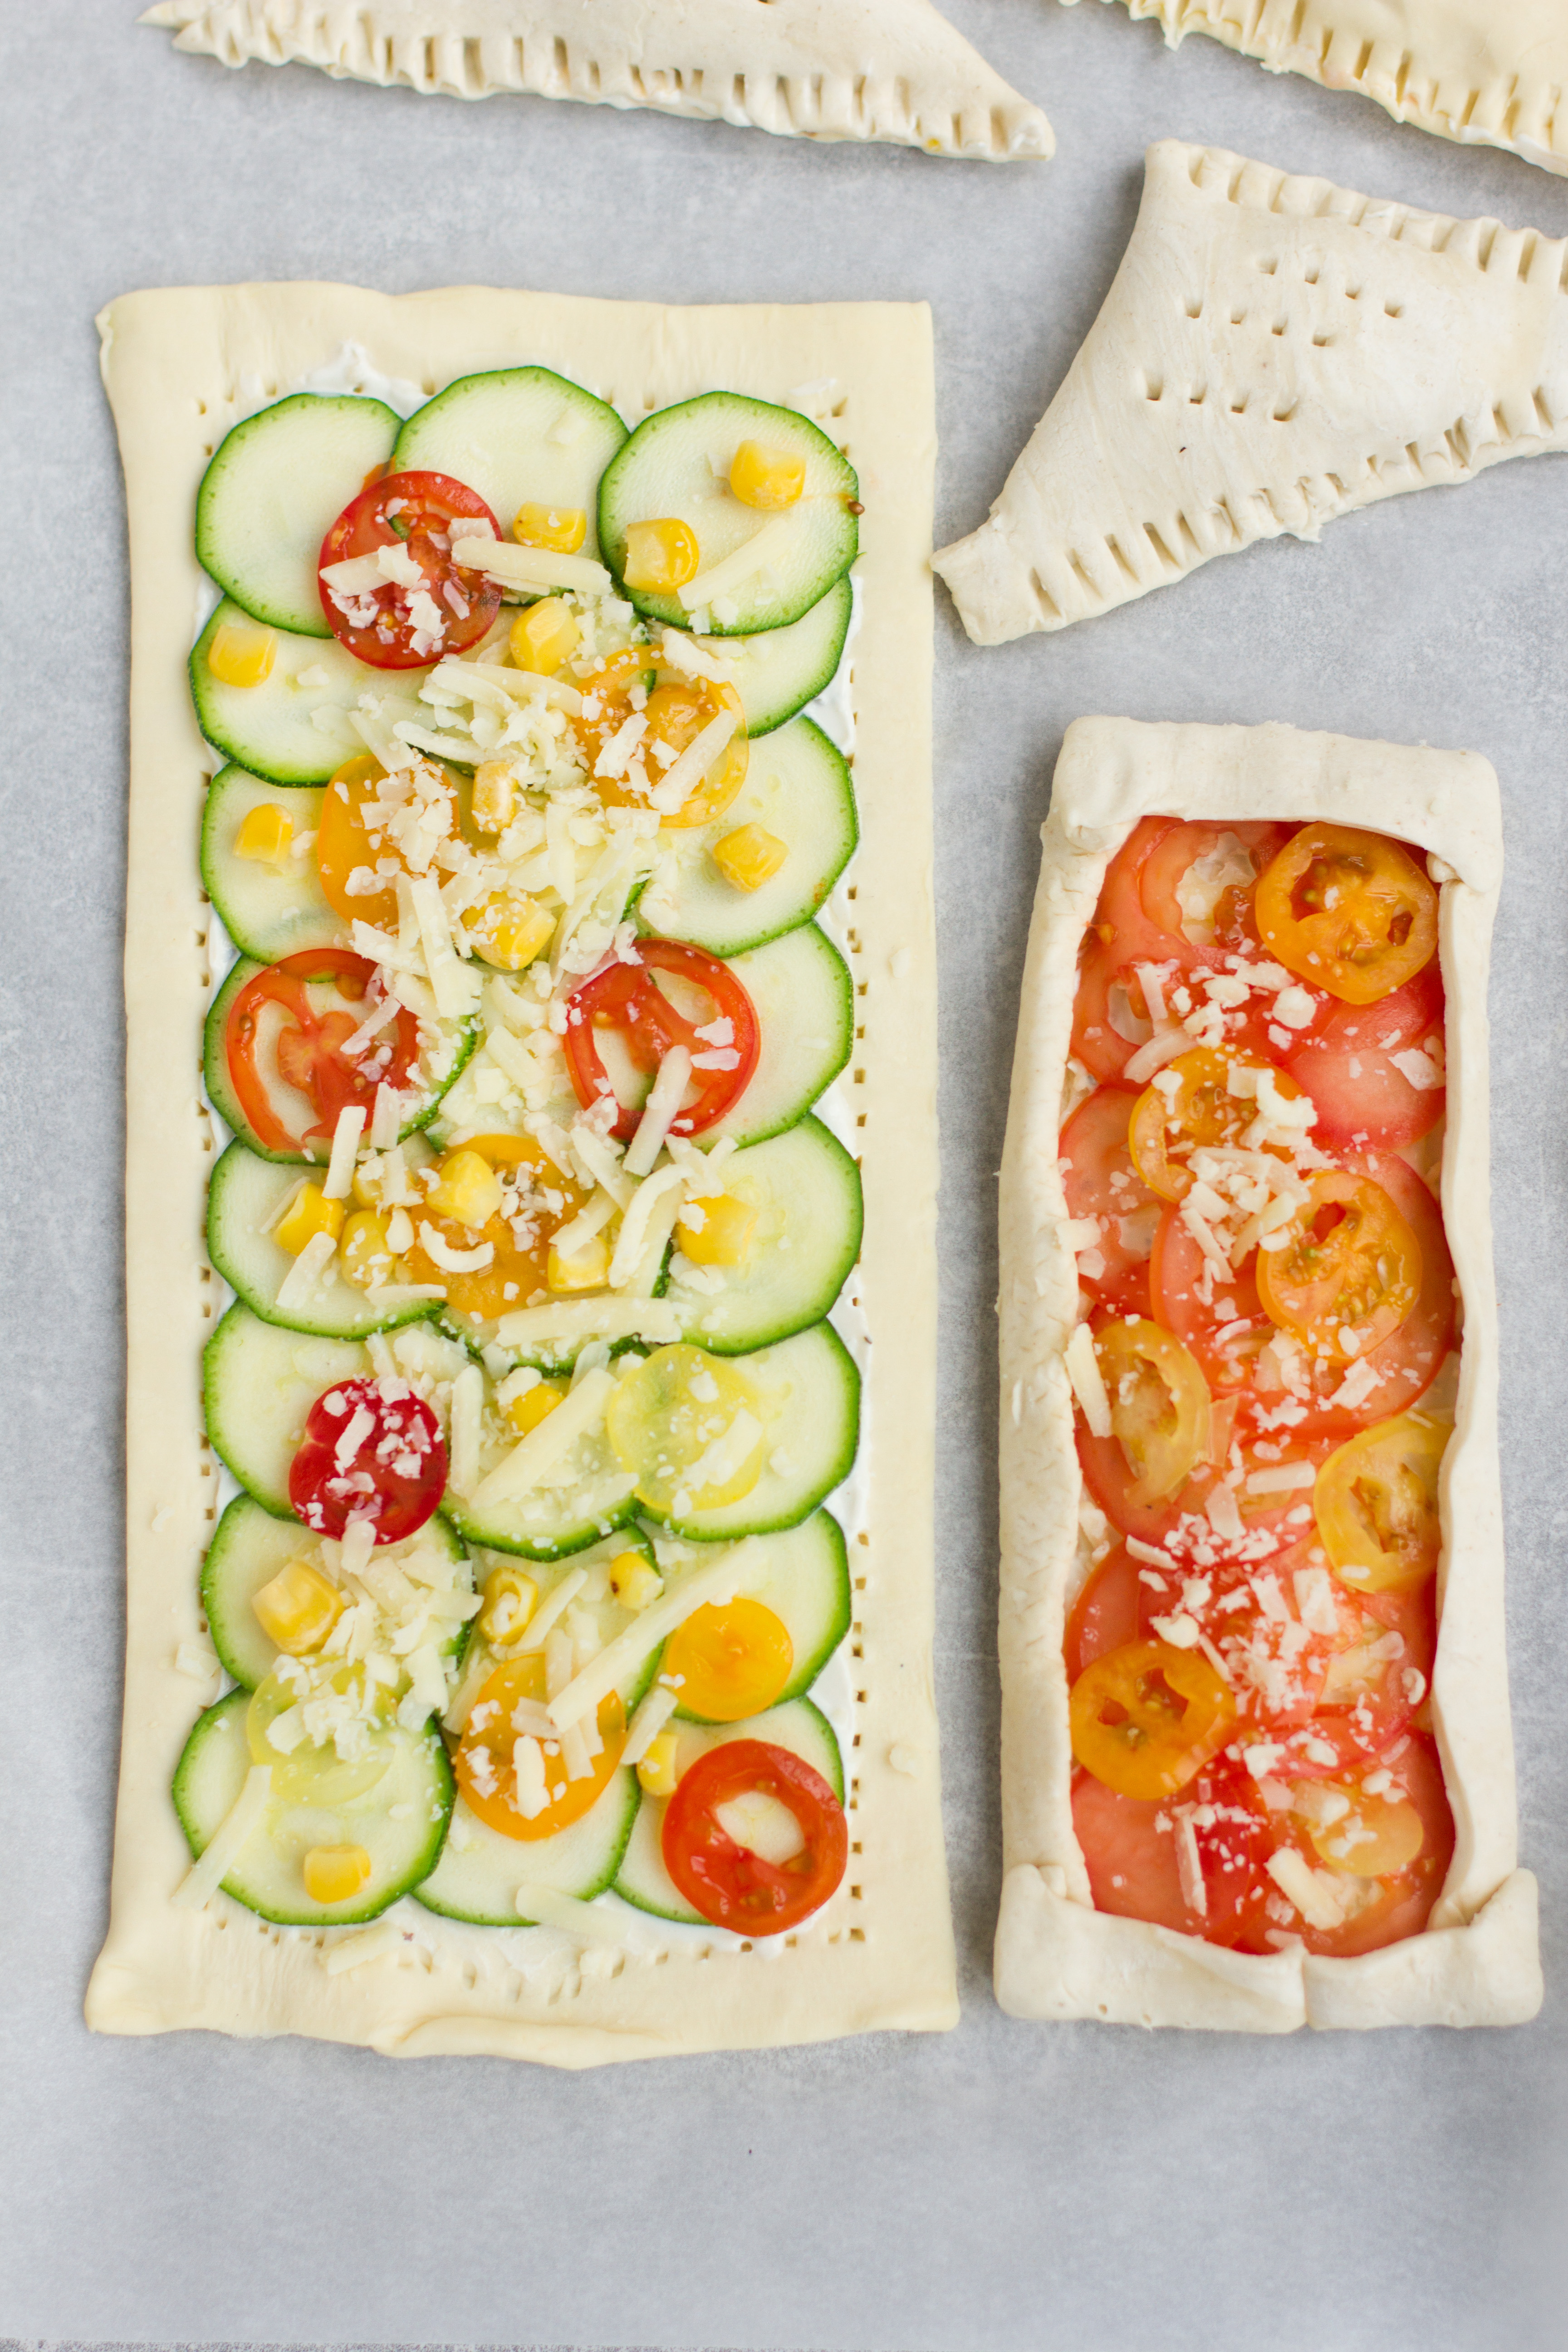 Vegetarian vegan valentines puff pastry pizzas with rainbow tomatoes and courgette, olives, sweetcorn, peas and feta